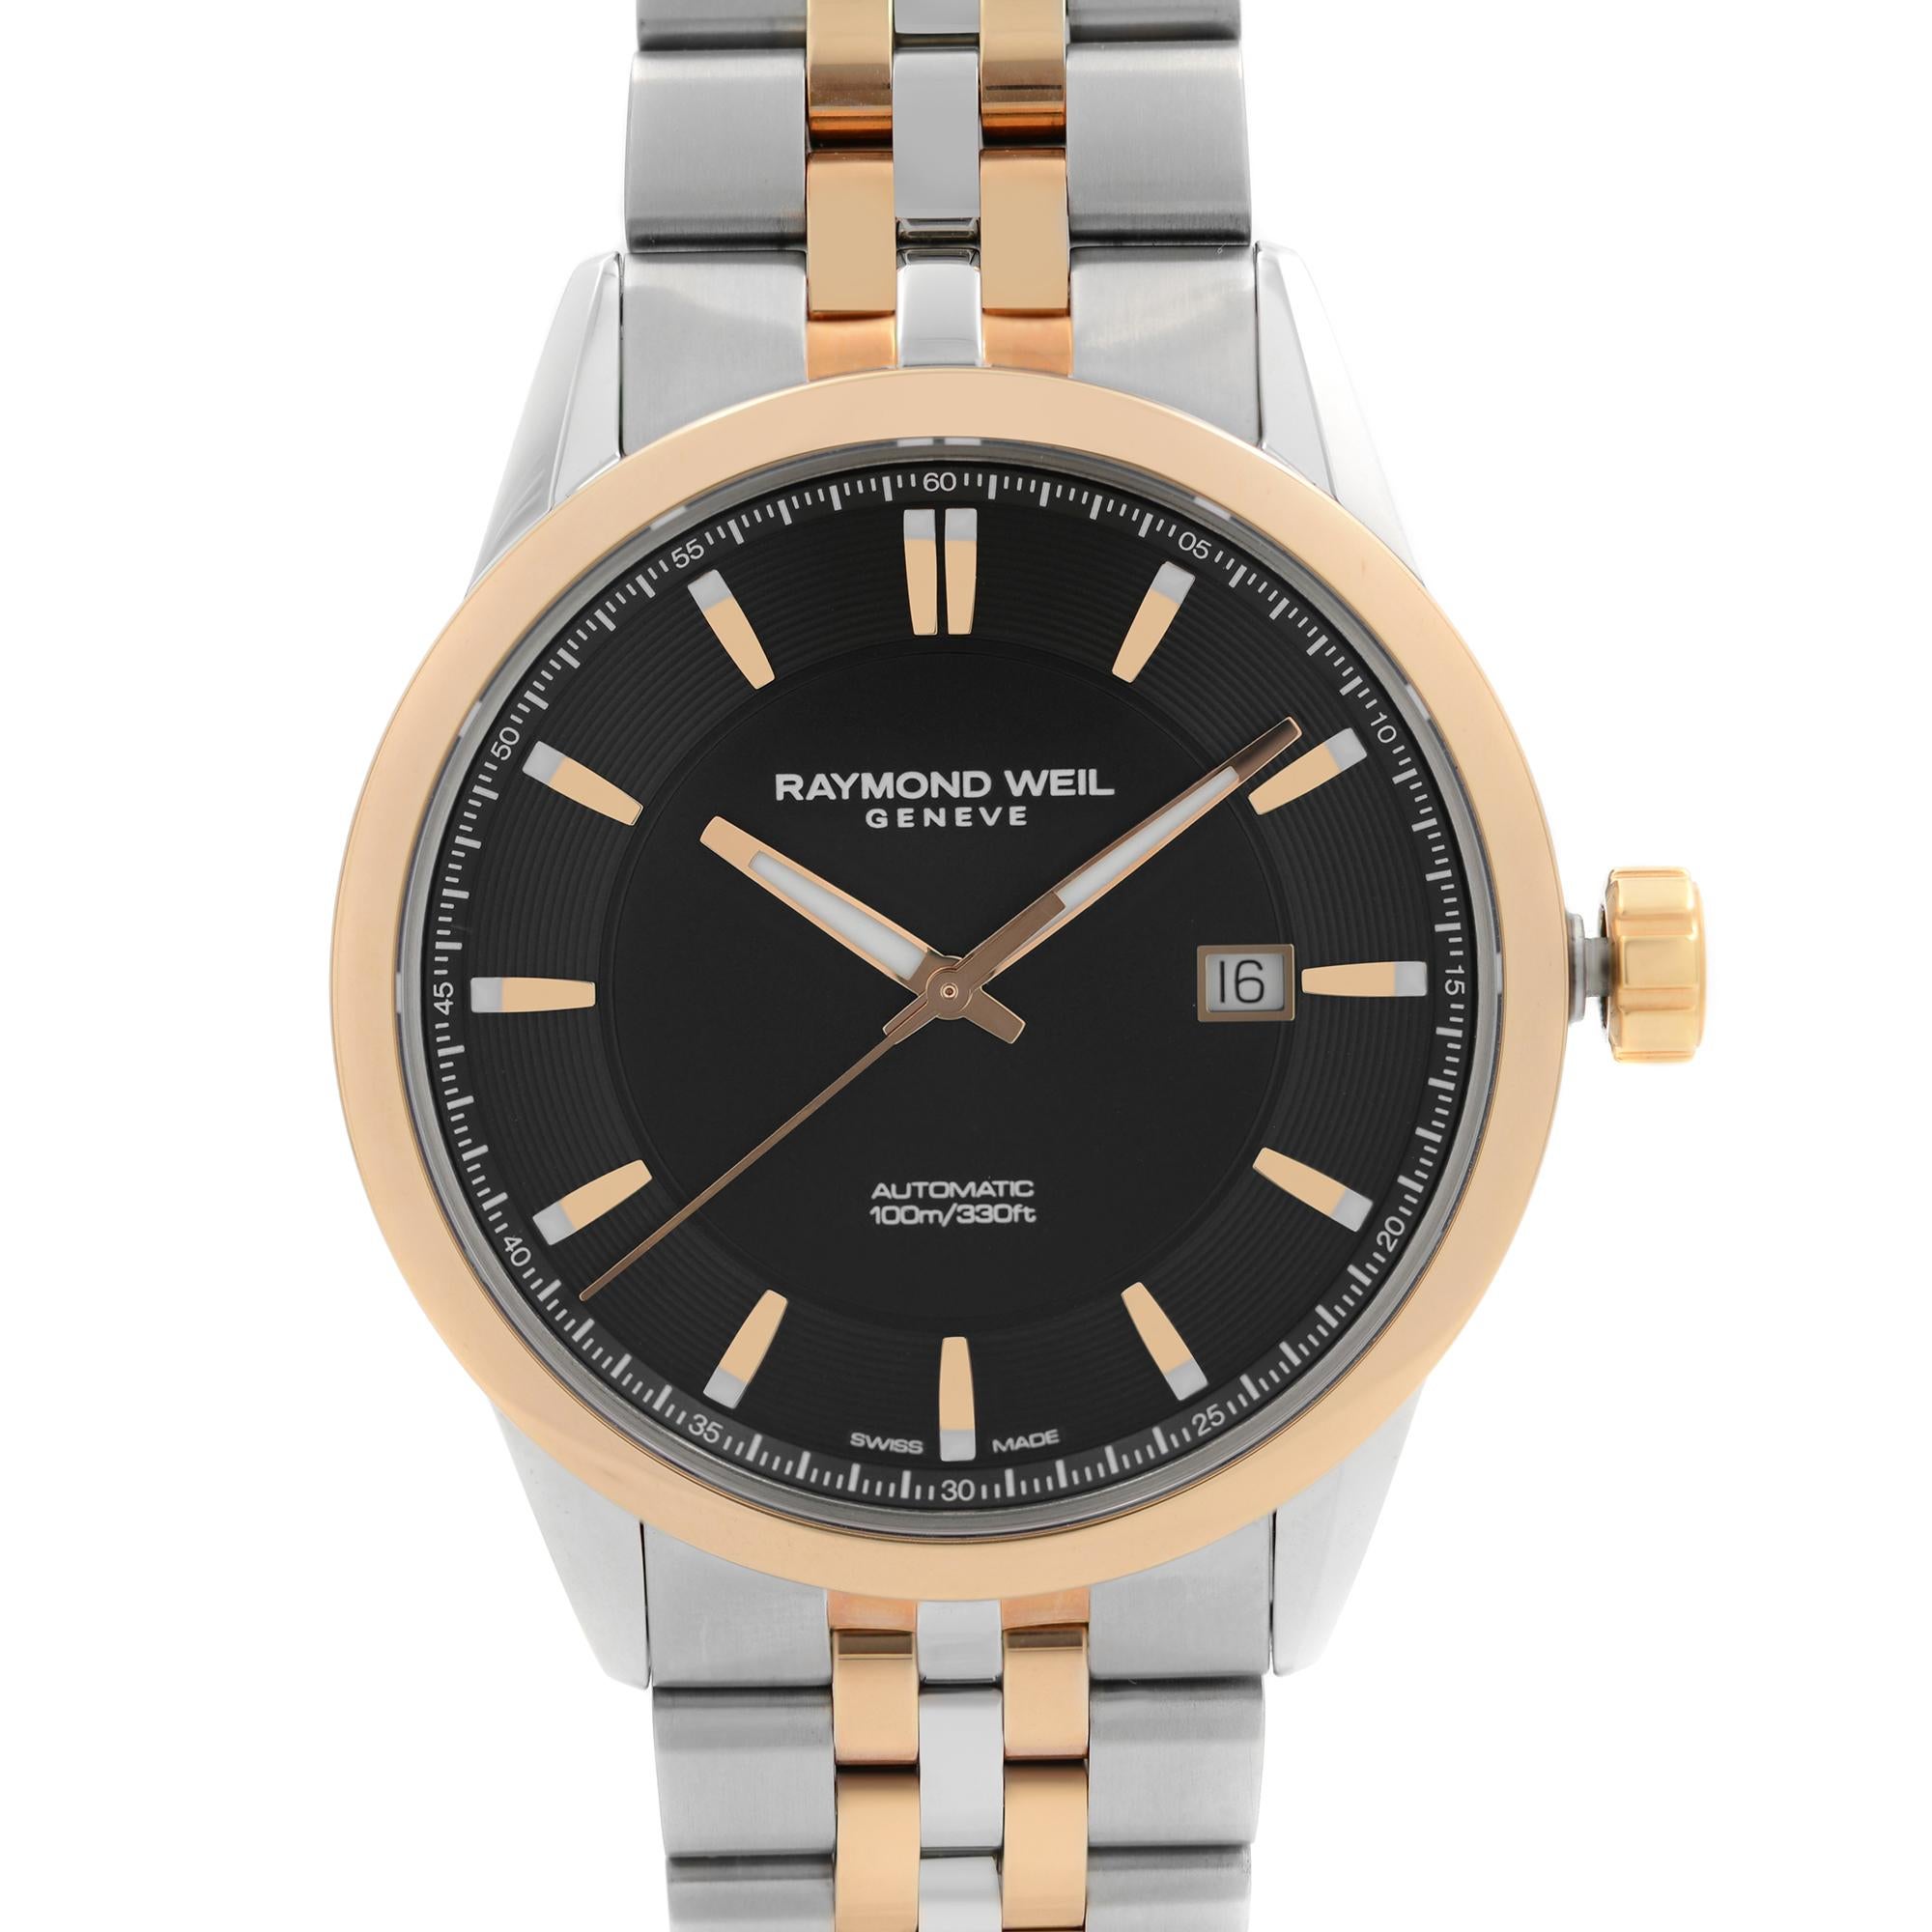 New With Defects. The Timepiece Has Tiny Dents on the Bezel and Minor Blemishes on the Gold Tone Links. Original Box and Papers are Included. Covered by a 2-year Chronostore Warranty. 
Details:
MSRP 1695
Brand RAYMOND WEIL
Department Men
Model